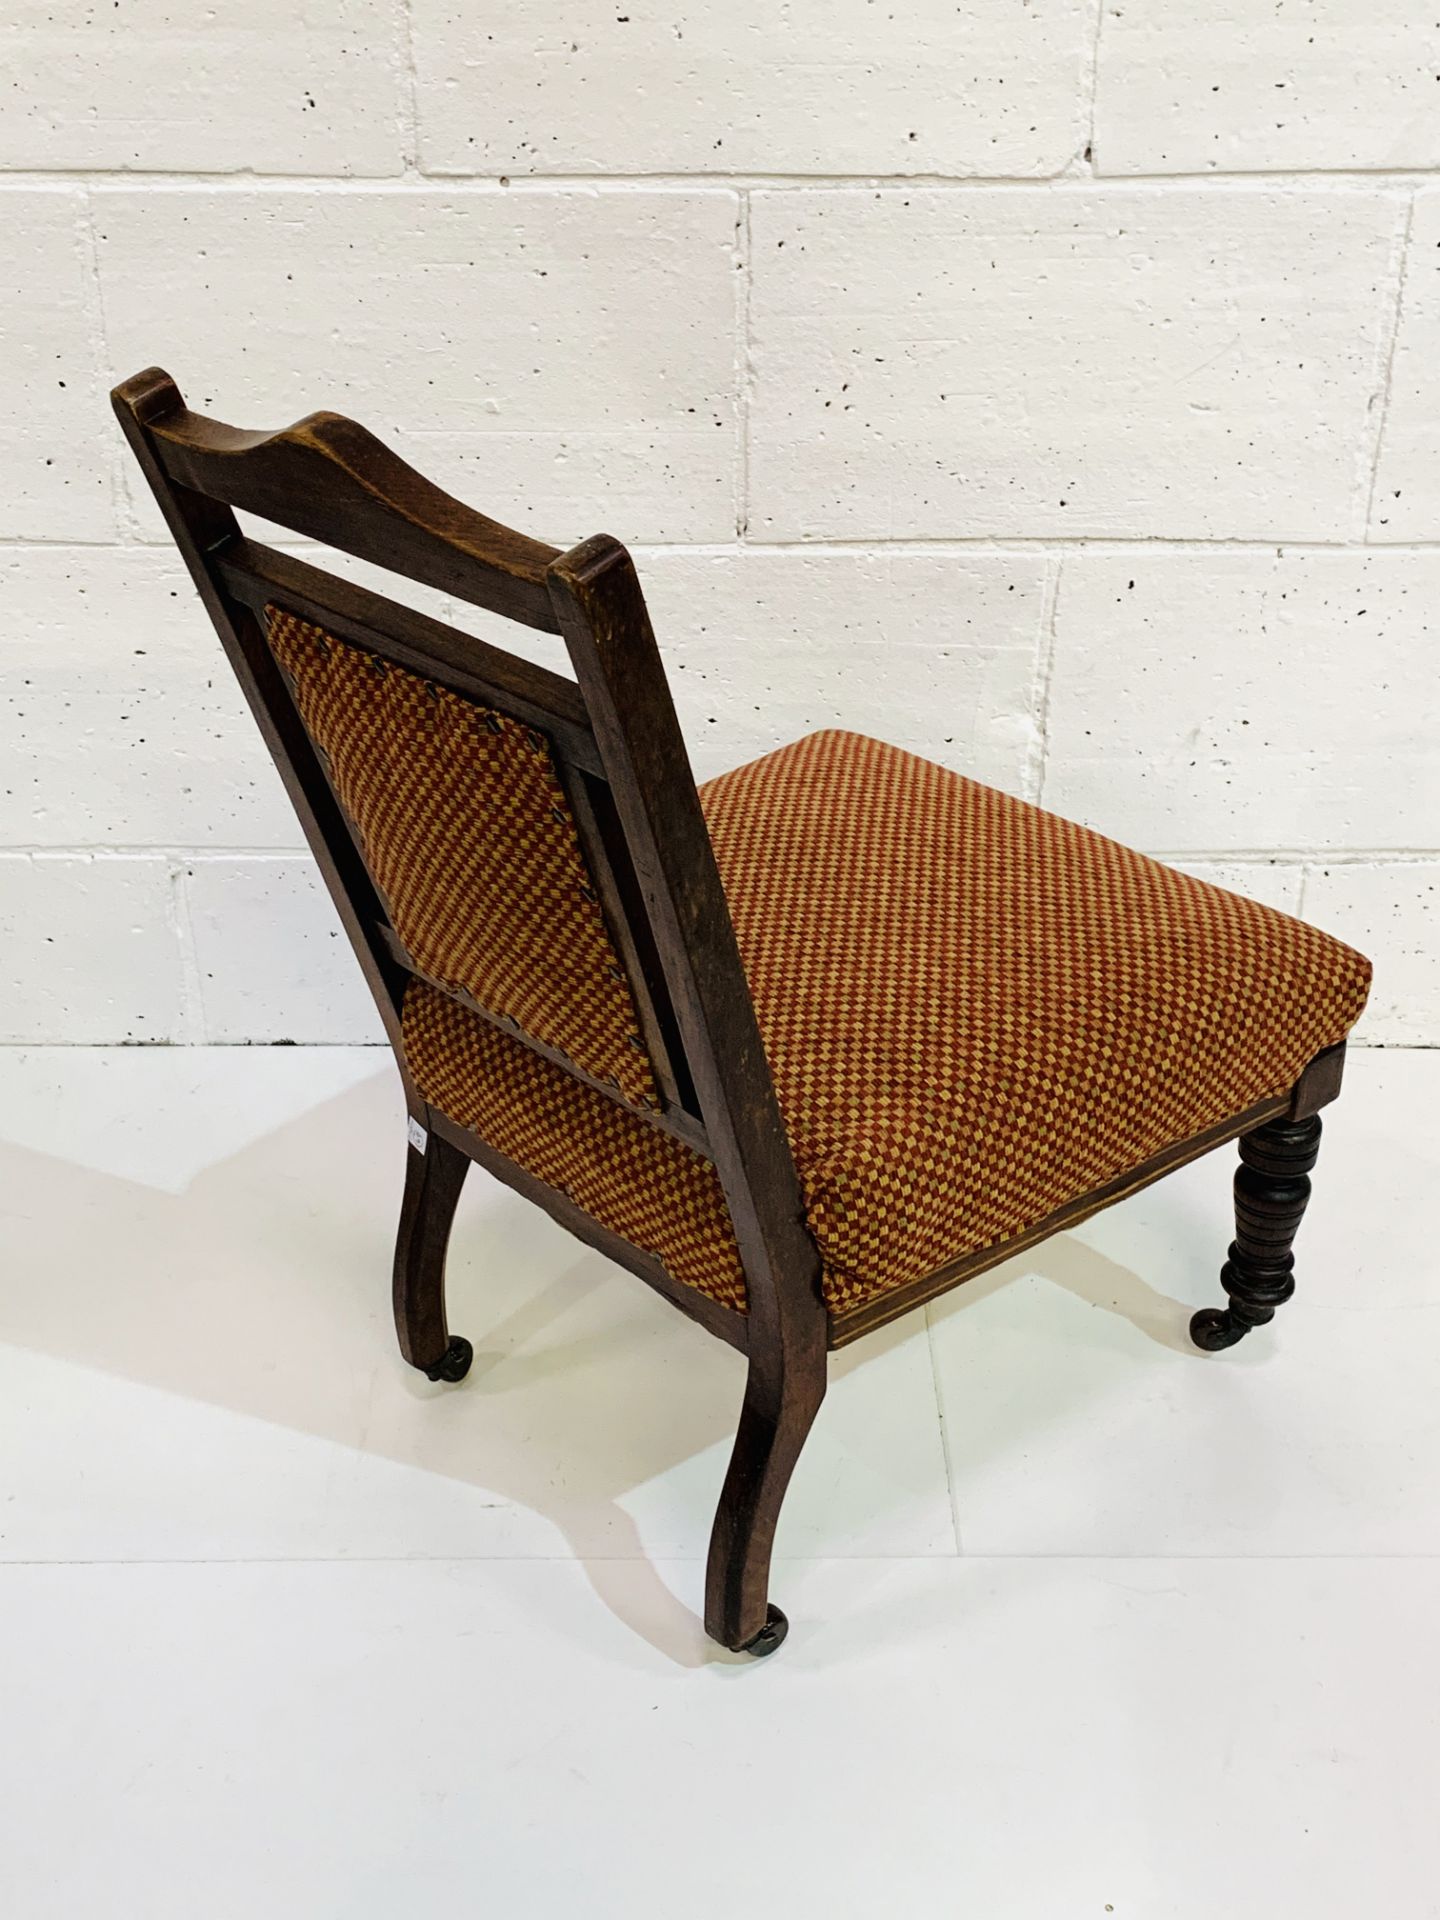 Mahogany Edwardian nursing chair with fan inlay and stringing. - Image 3 of 3